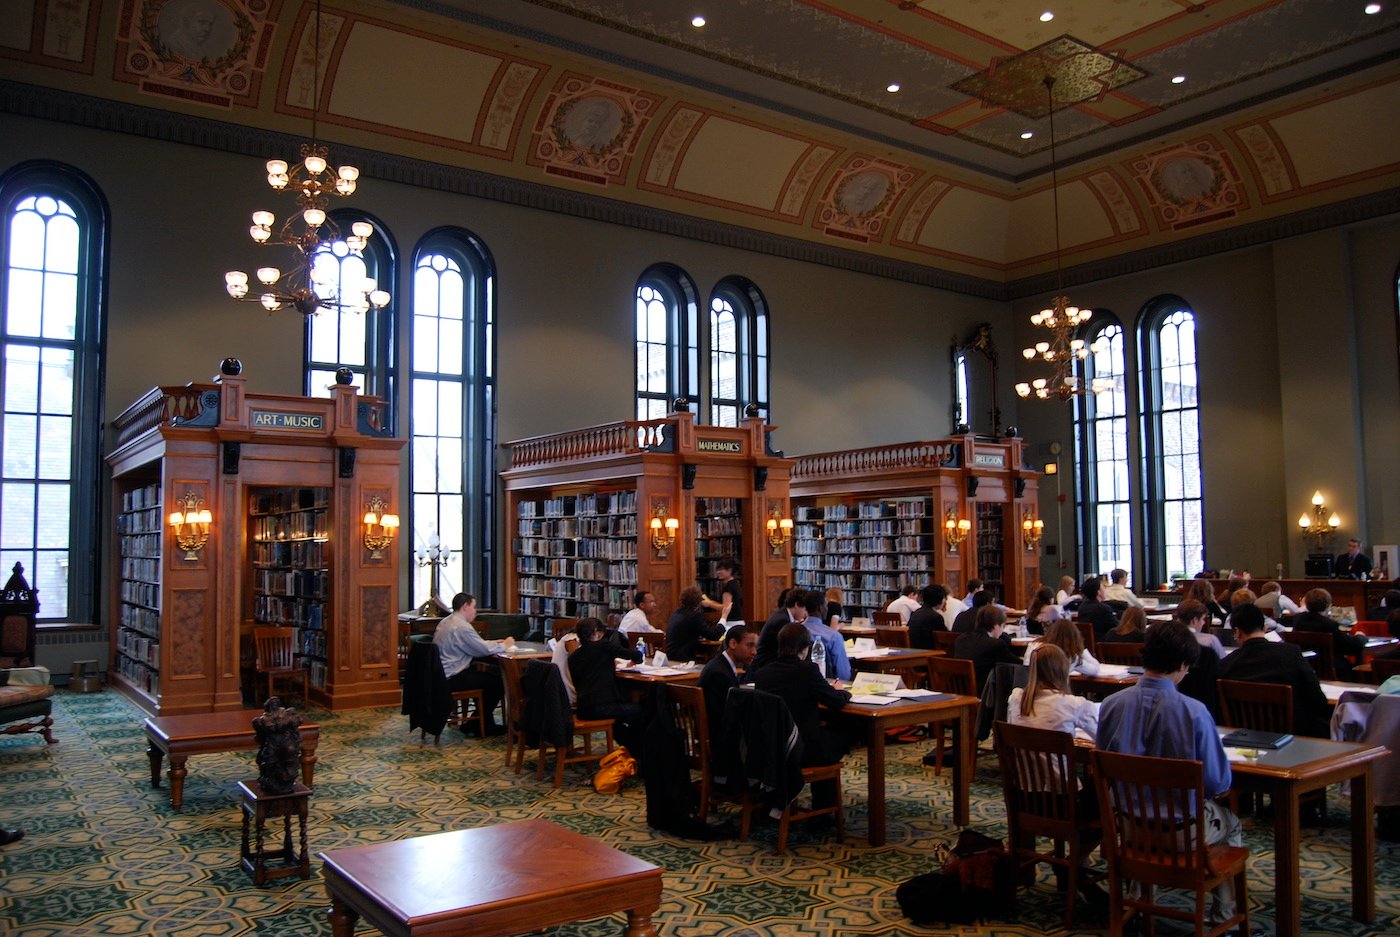 Students hosting Model UN at Foglia Library inside St. Ignatius College Prep in Chicago. Arts, music, mathematics, and religion book stacks visible in background.